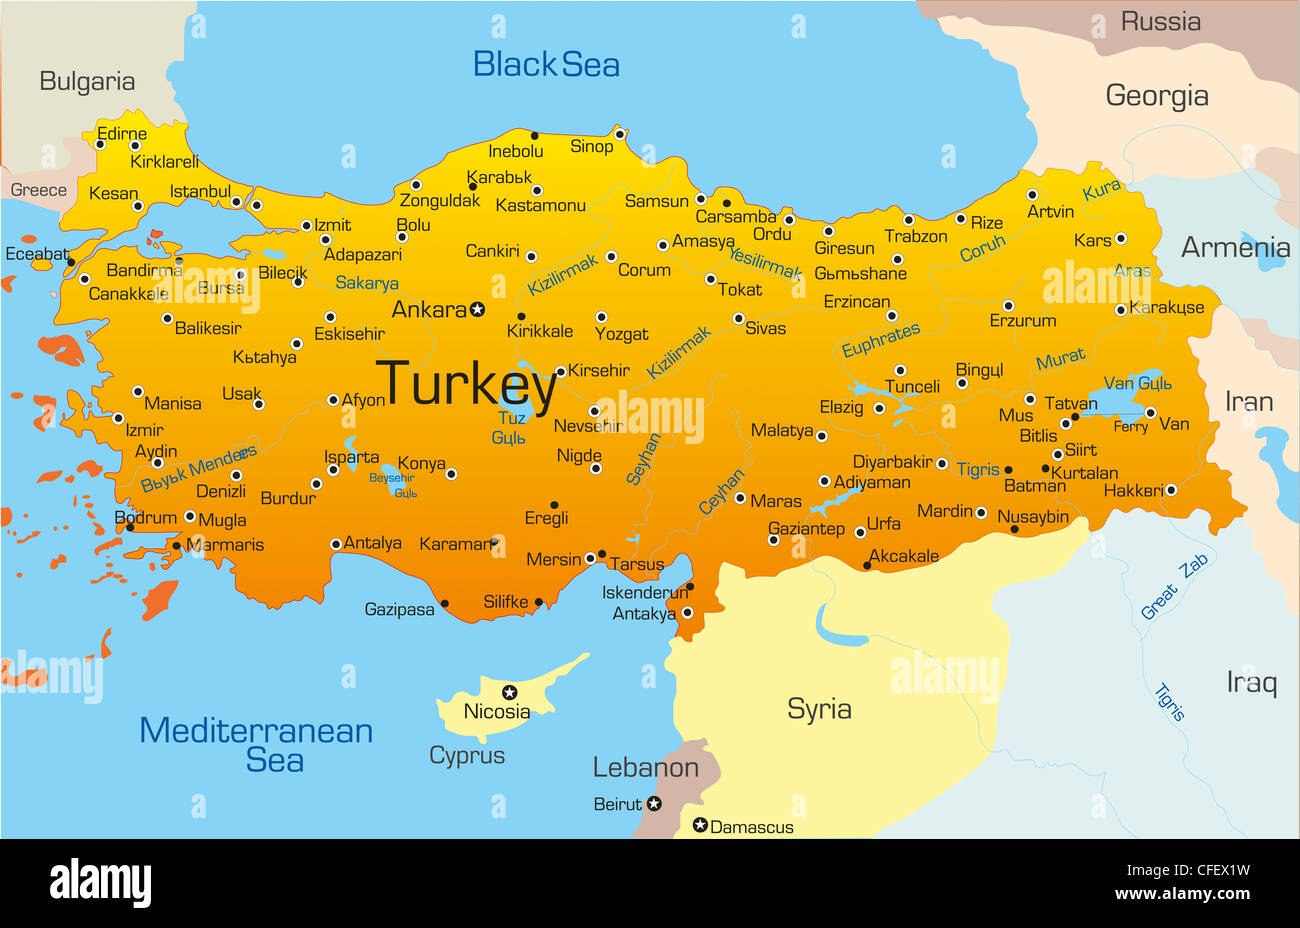 Vector map of Turkey country Stock Photo: 43968341 - Alamy